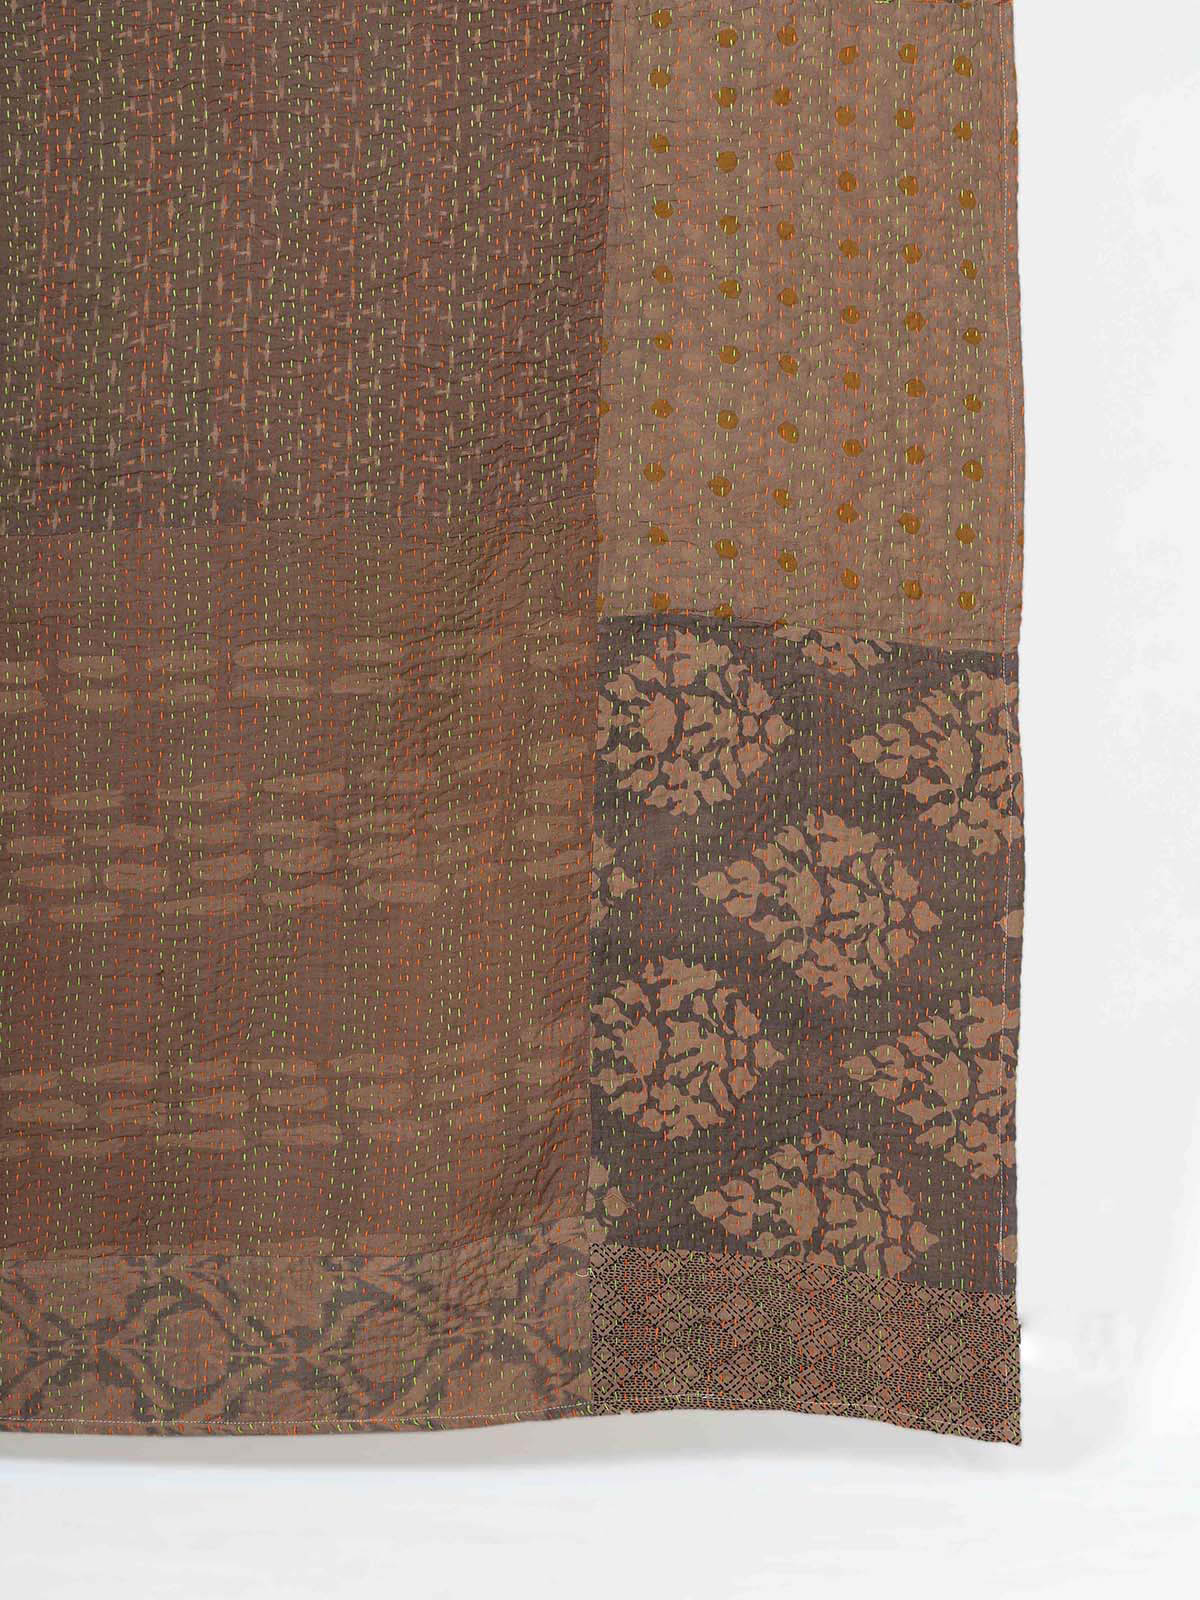 Gudja Assorted Printed Patch Kantha Throw